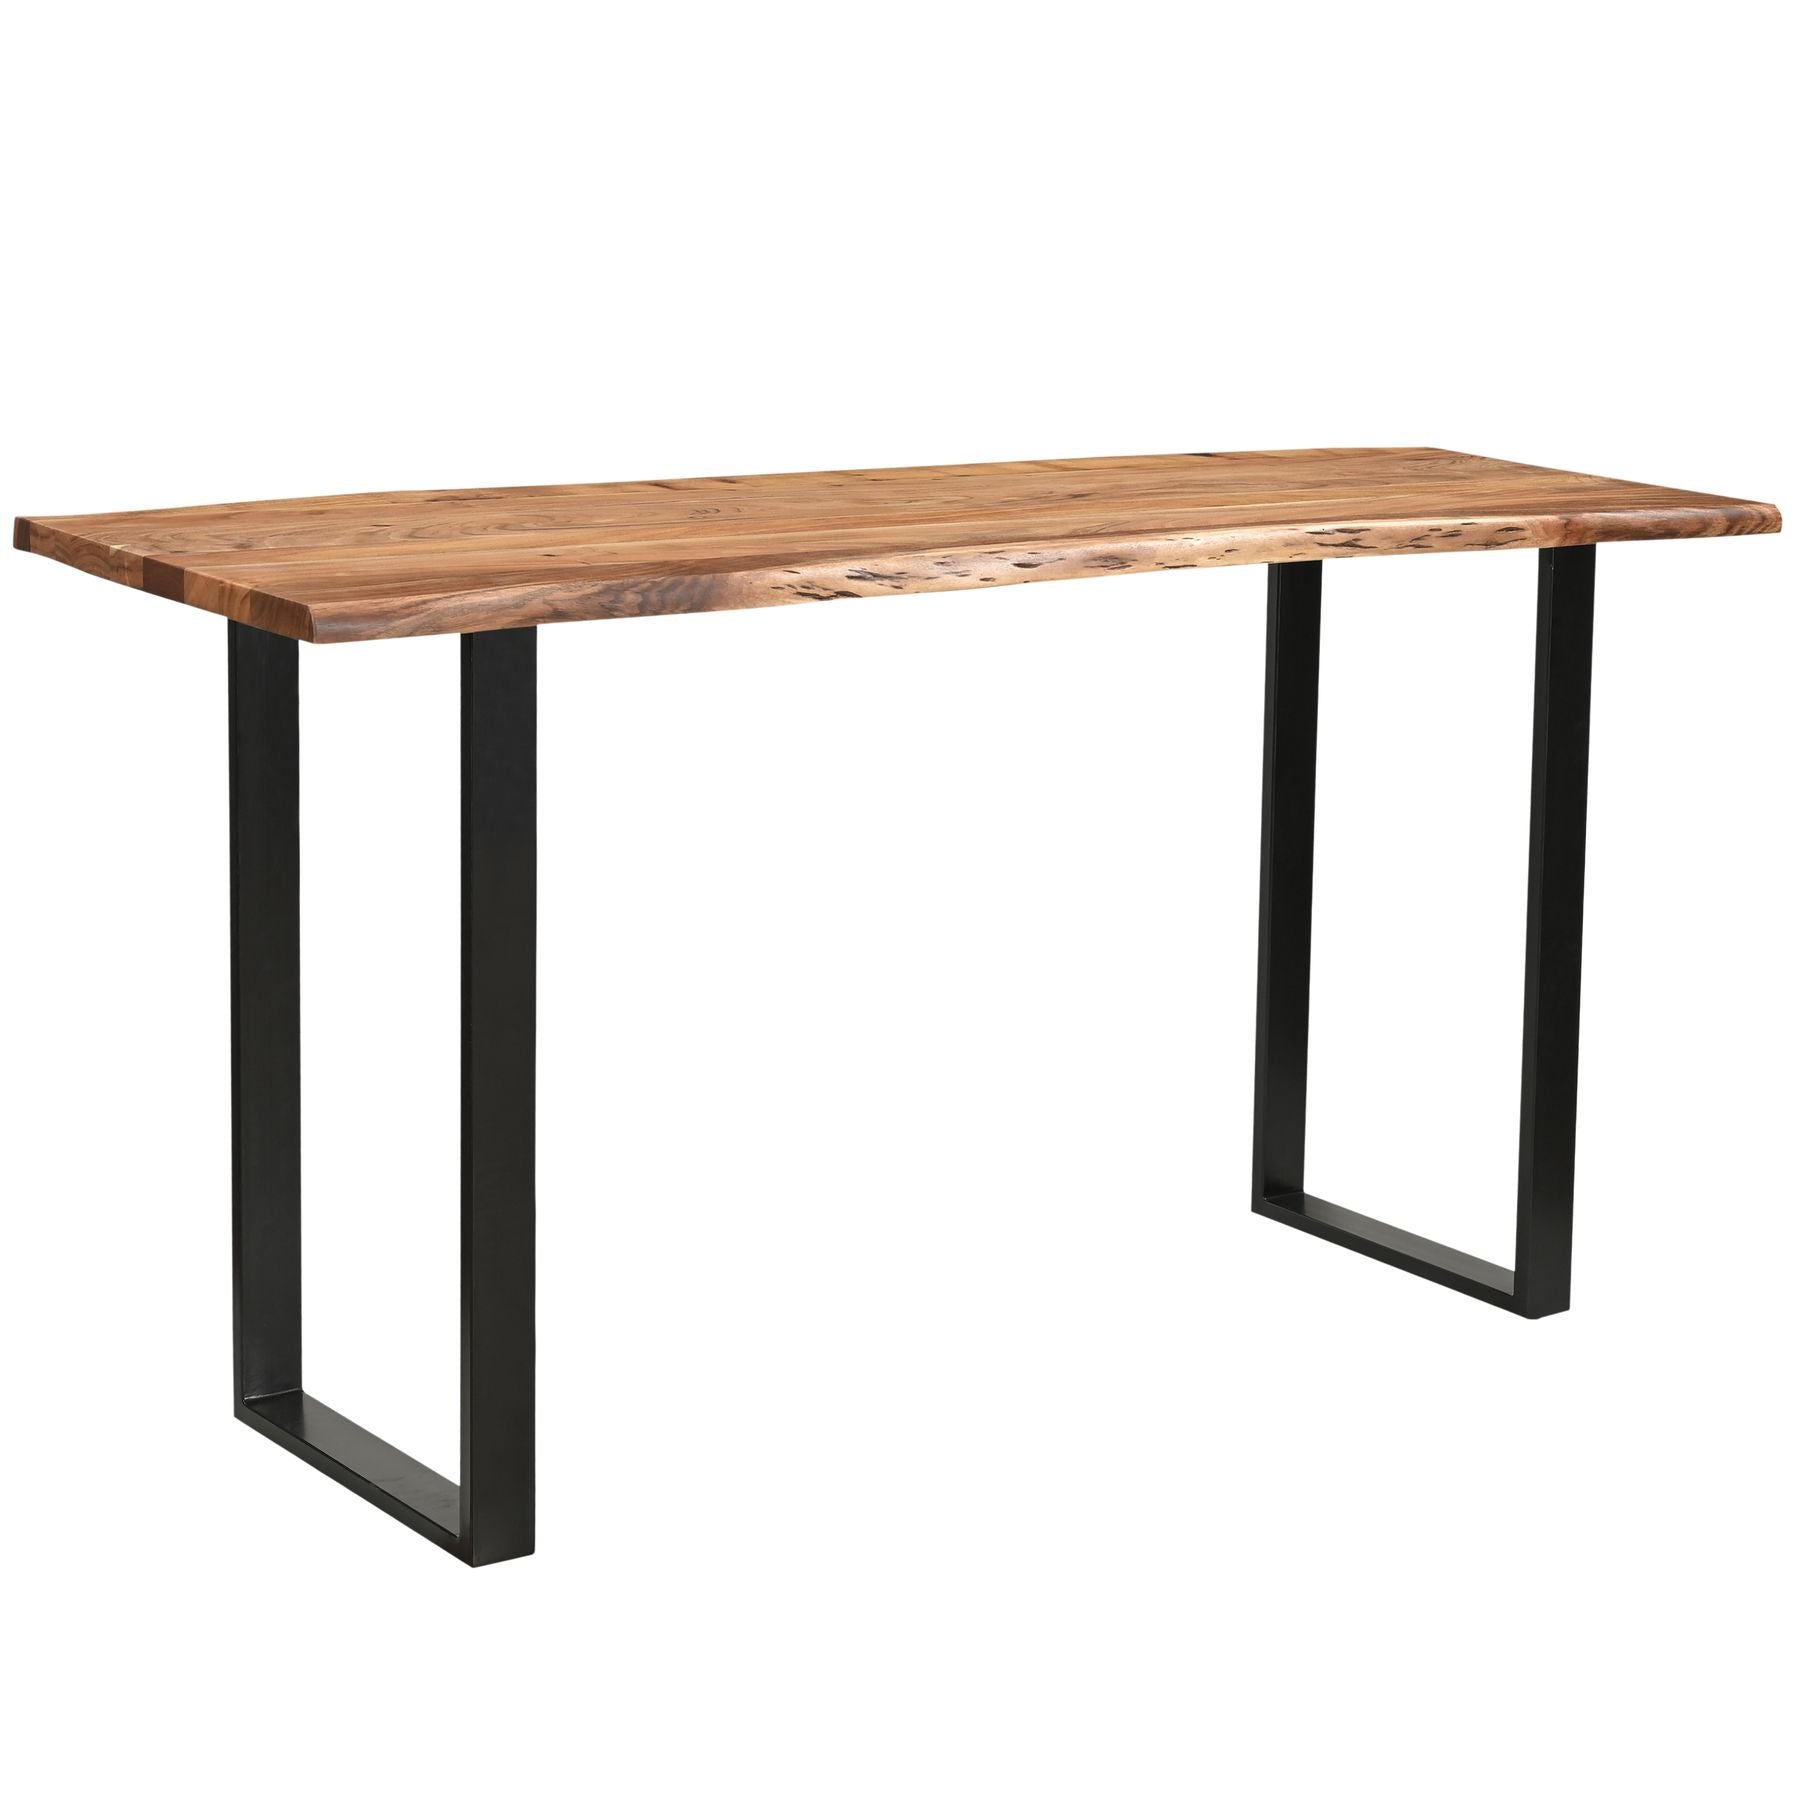 View Live Edge Large Bar Table information